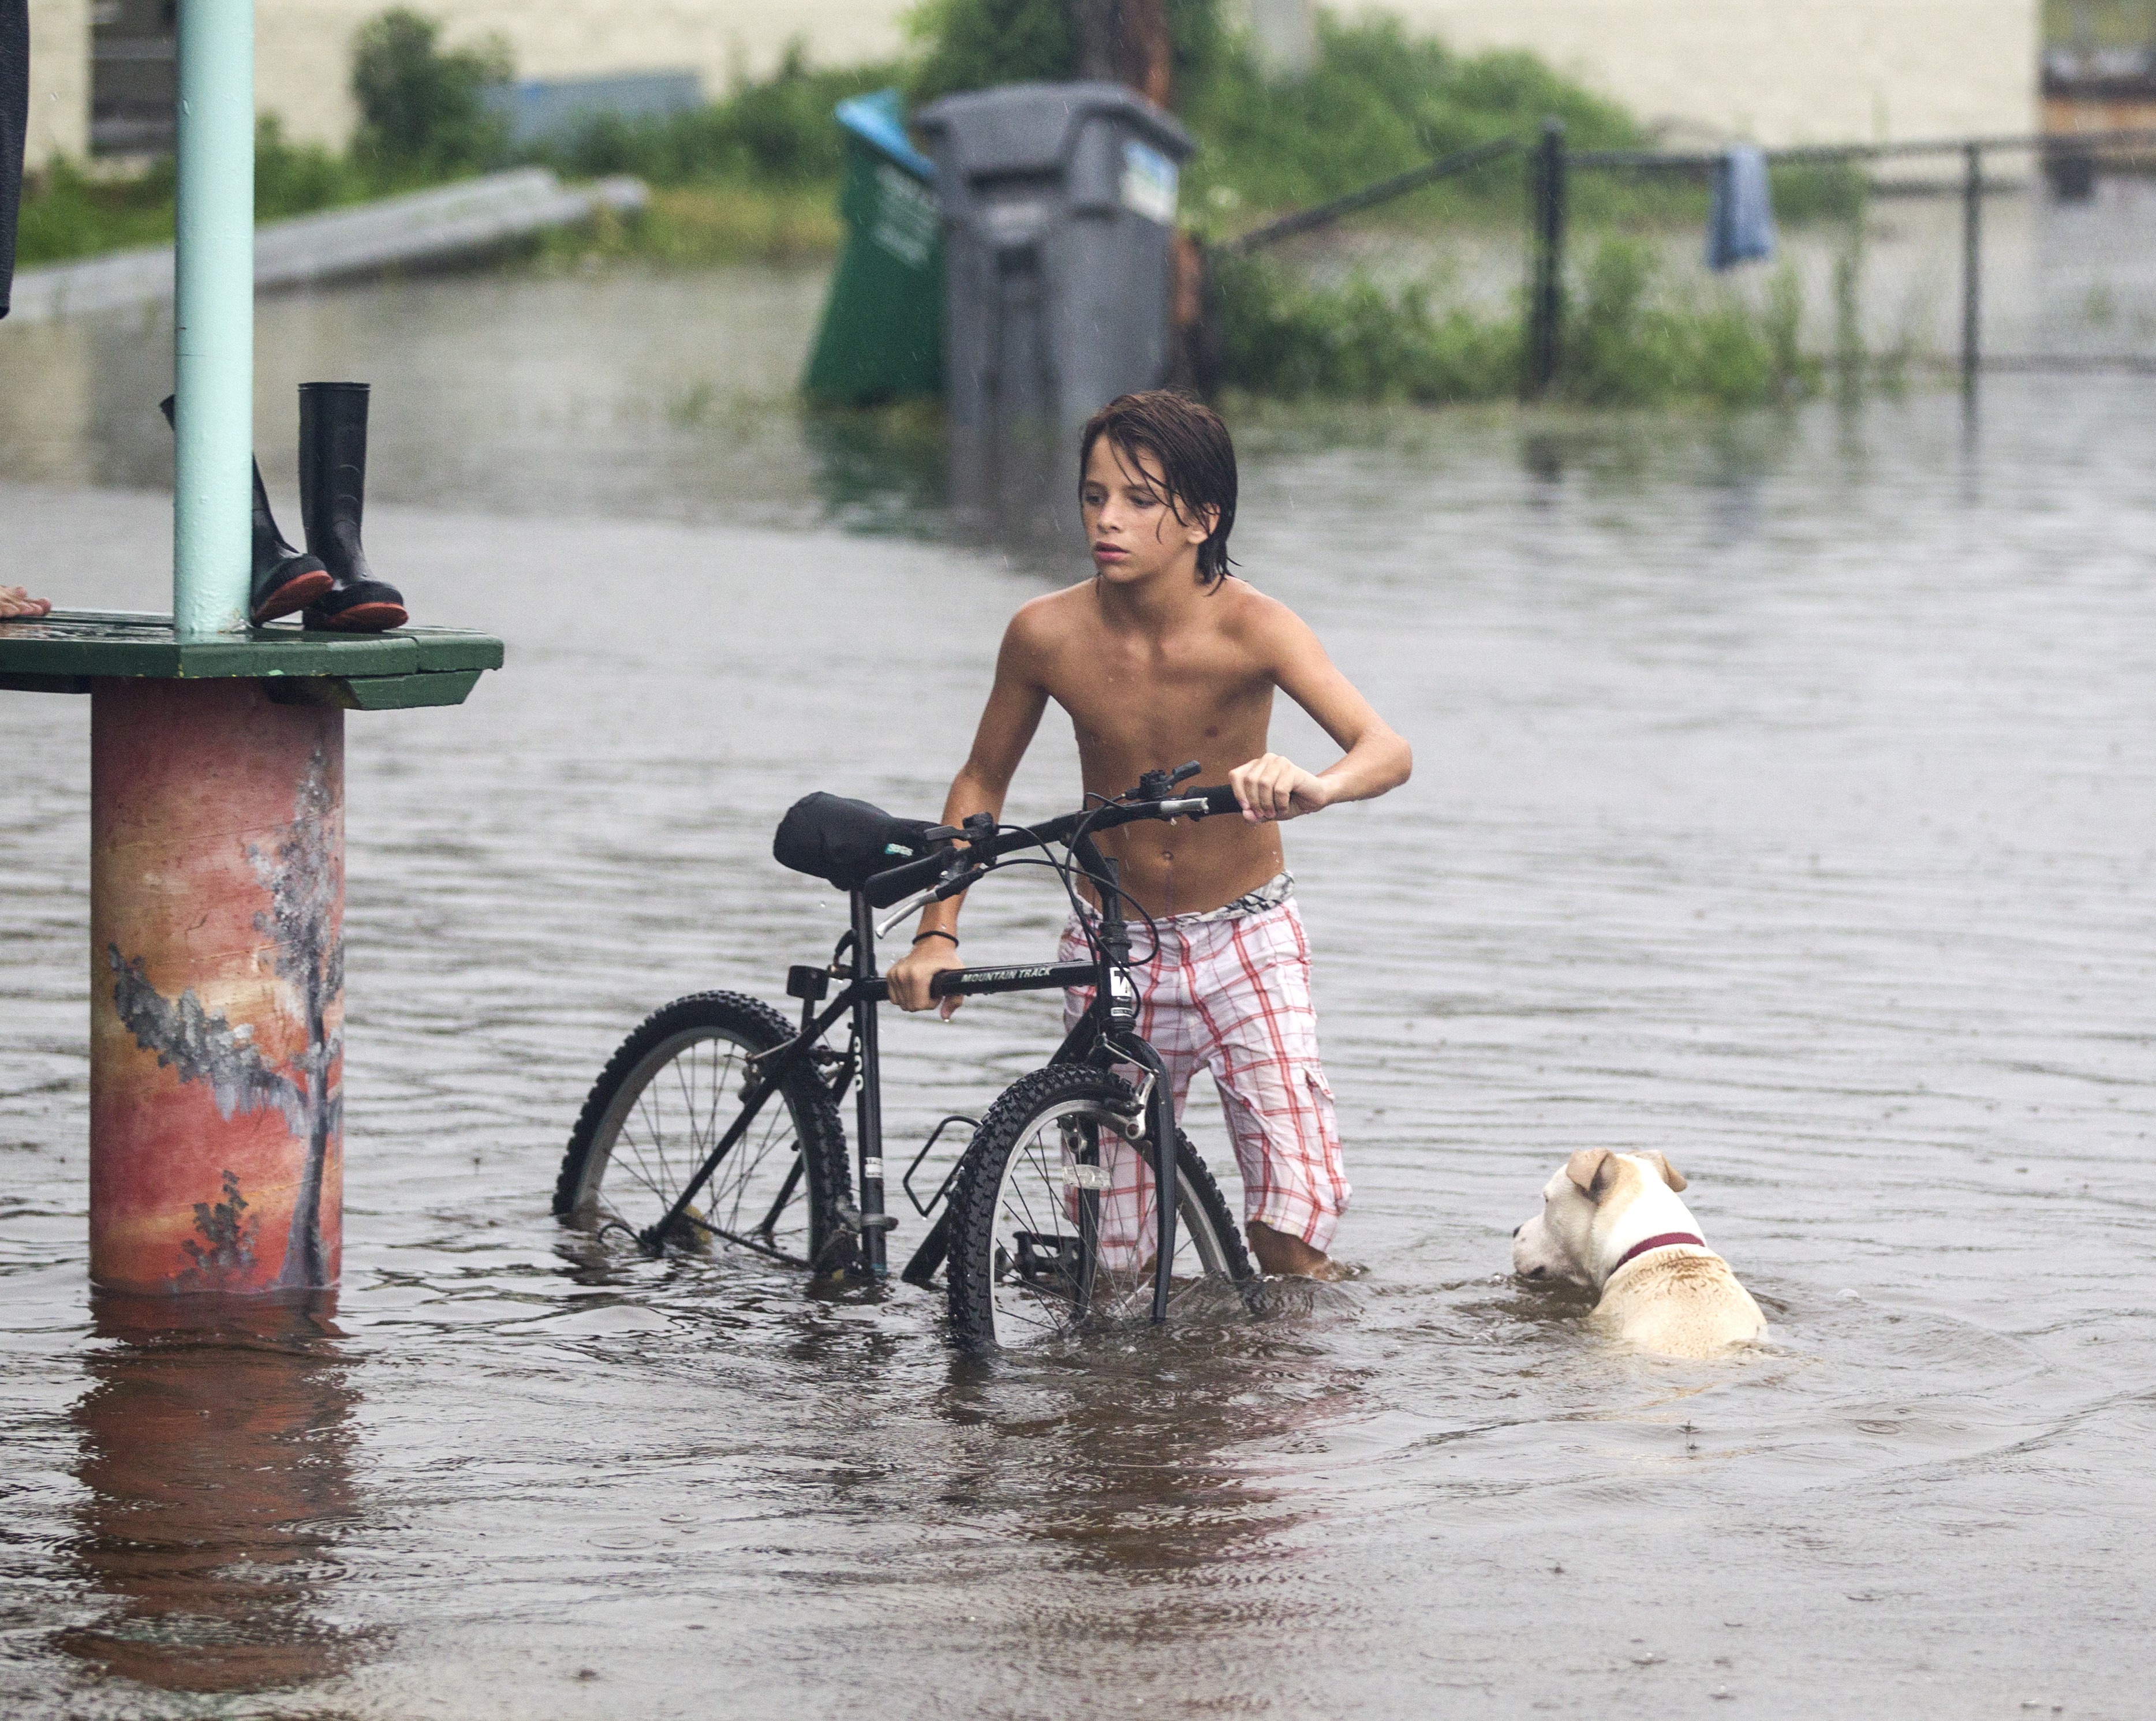 SAINT MARKS, FL - SEPTEMBER 01: A young man and his dog wades in the storm surge from Hurricane Hermaine outside Cooter Stew Cafe on September 1, 2016 in Saint Marks, Florida. Hurricane warnings have been issued for parts of Florida's Gulf Coast as Hermine is expected to make landfall as a Category 1 hurricane.